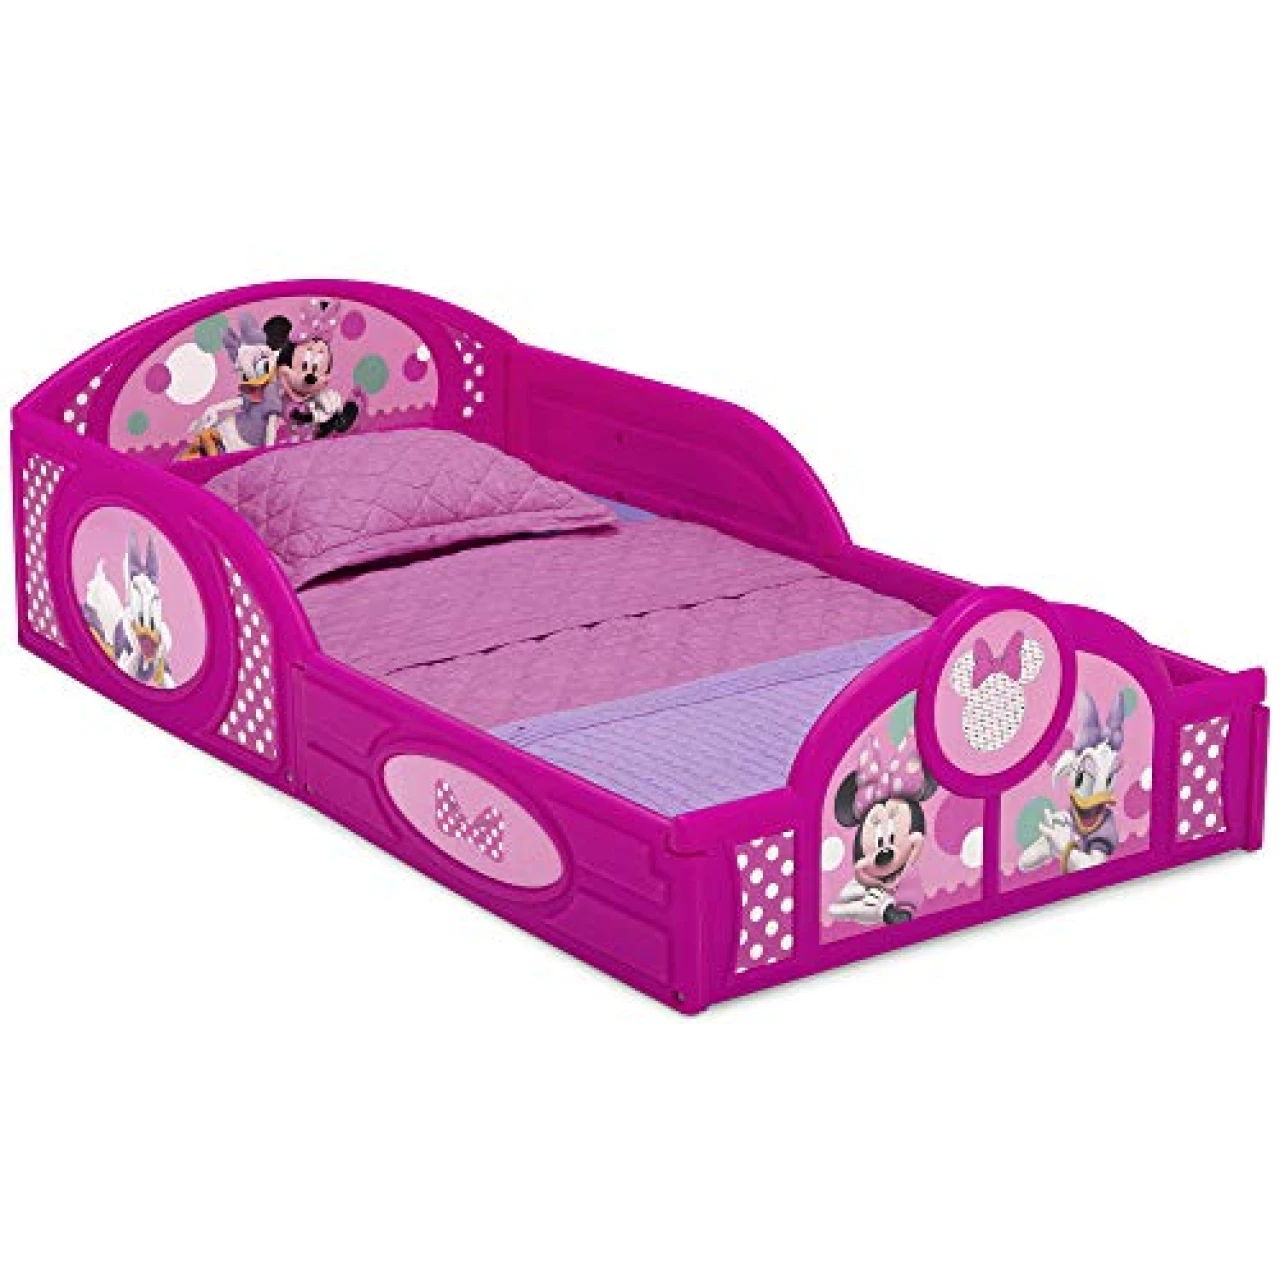 Disney Minnie Mouse Plastic Sleep and Play Toddler Bed with Attached Guardrails by Delta Children